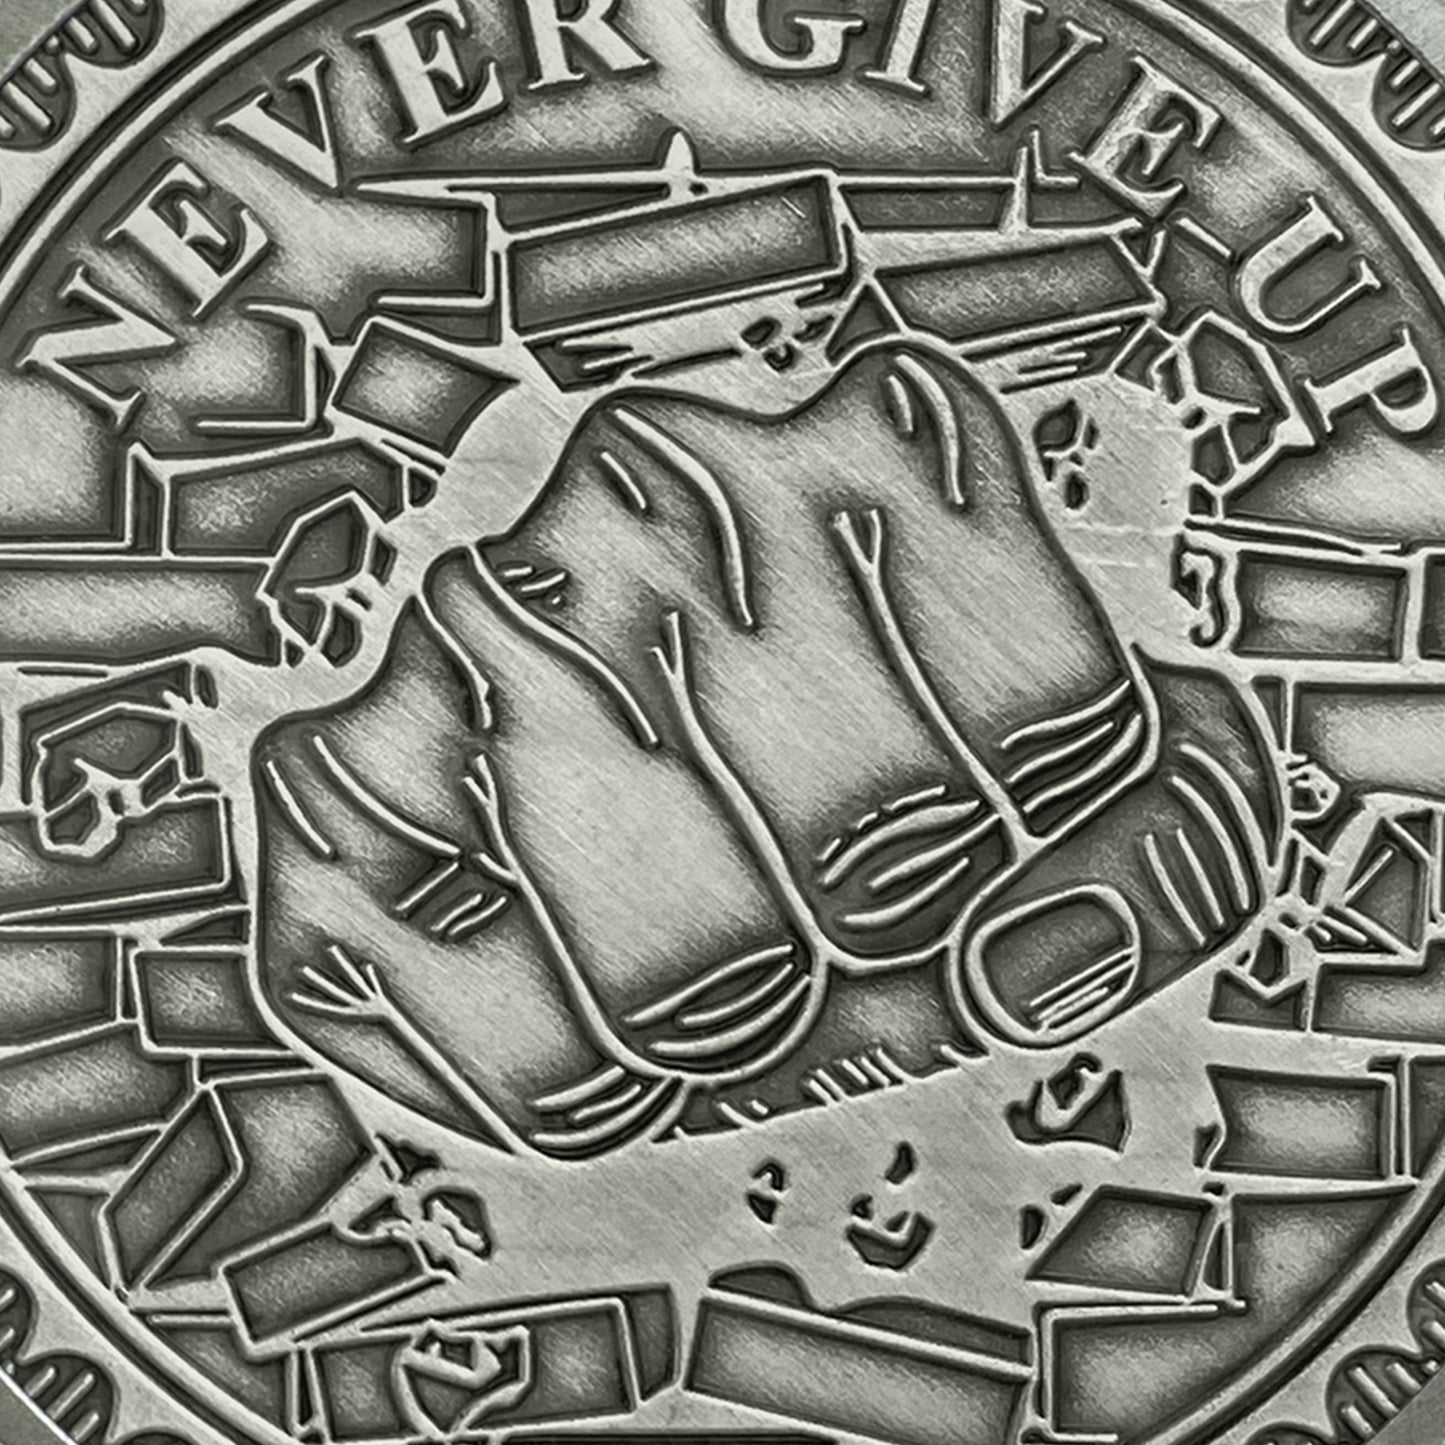 Never Give Up Encouragement Sobriety Coin Growth Gift AA Chips